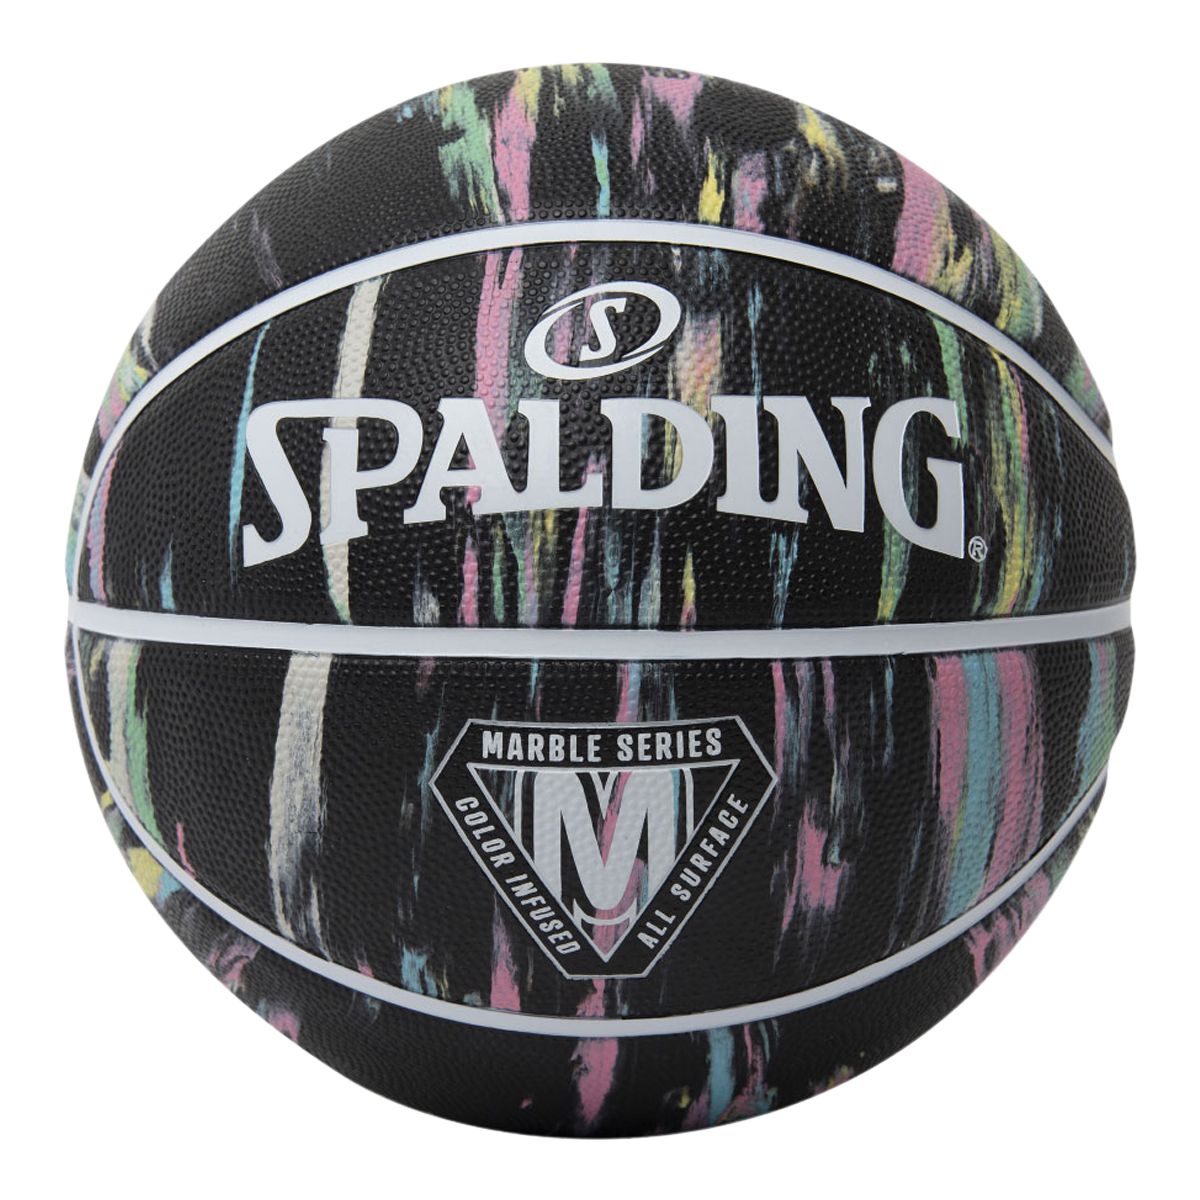 Image of Spalding Marble Series Basketball Size 6 Outdoor